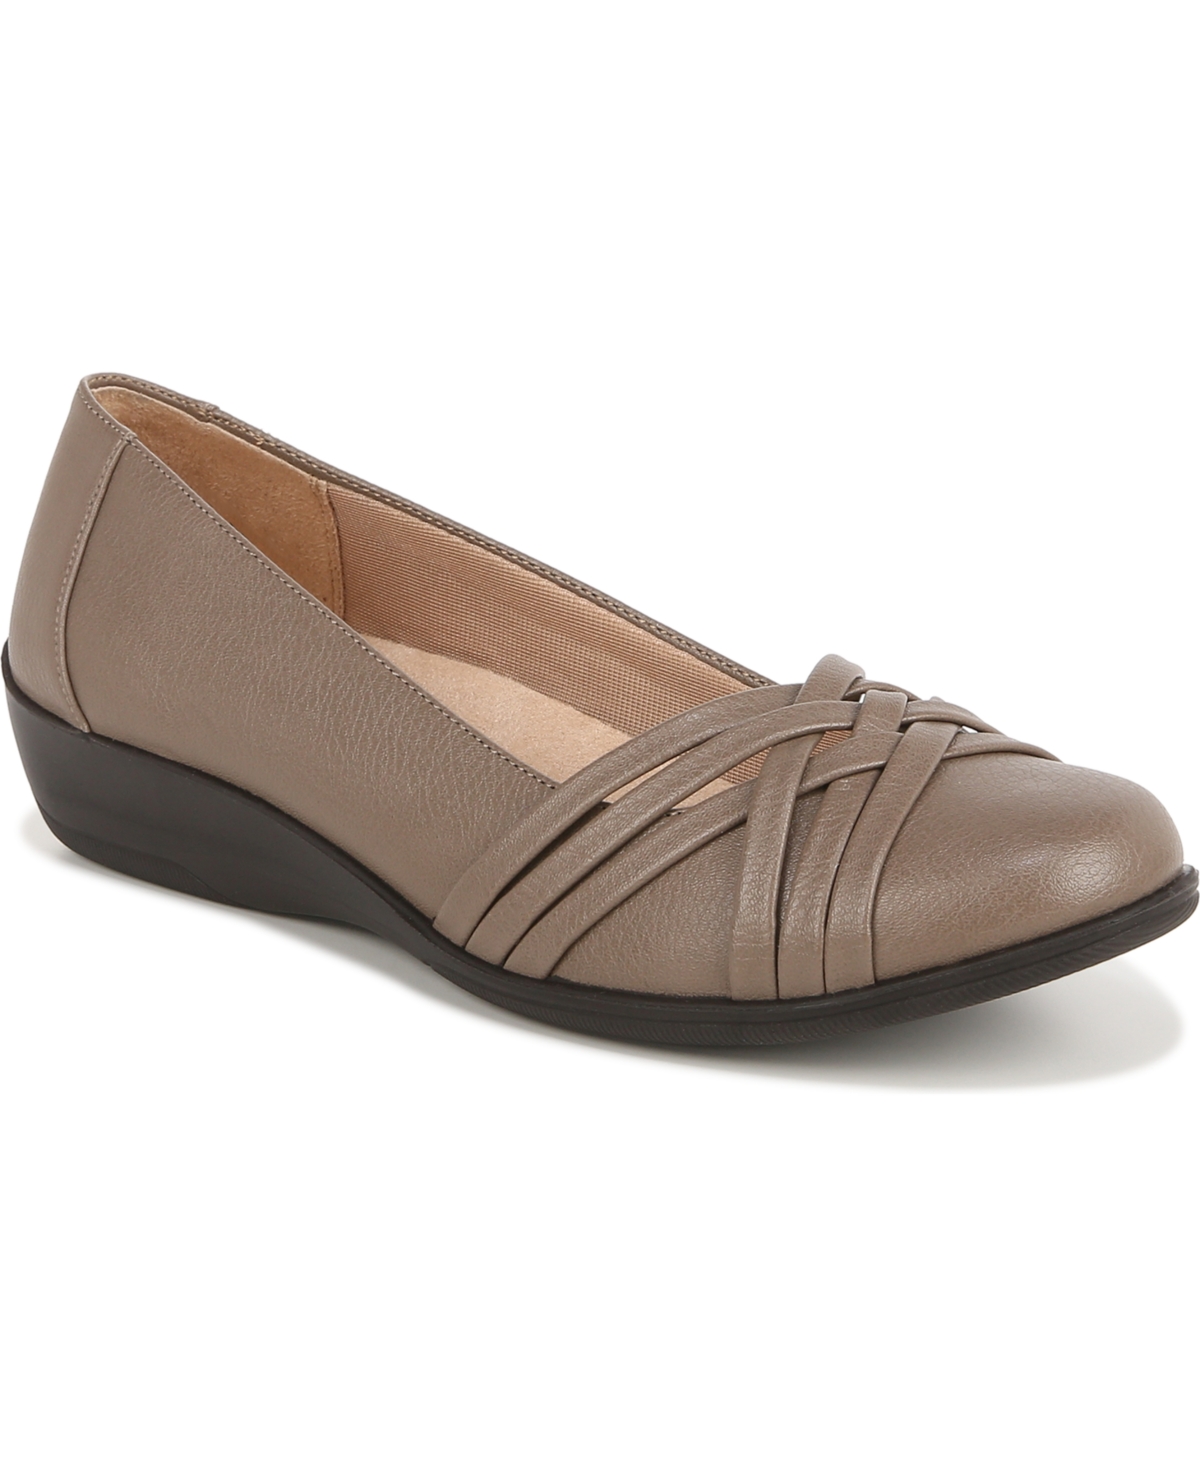 Lifestride Incredible Slip-on Flats In Beige Faux Leather